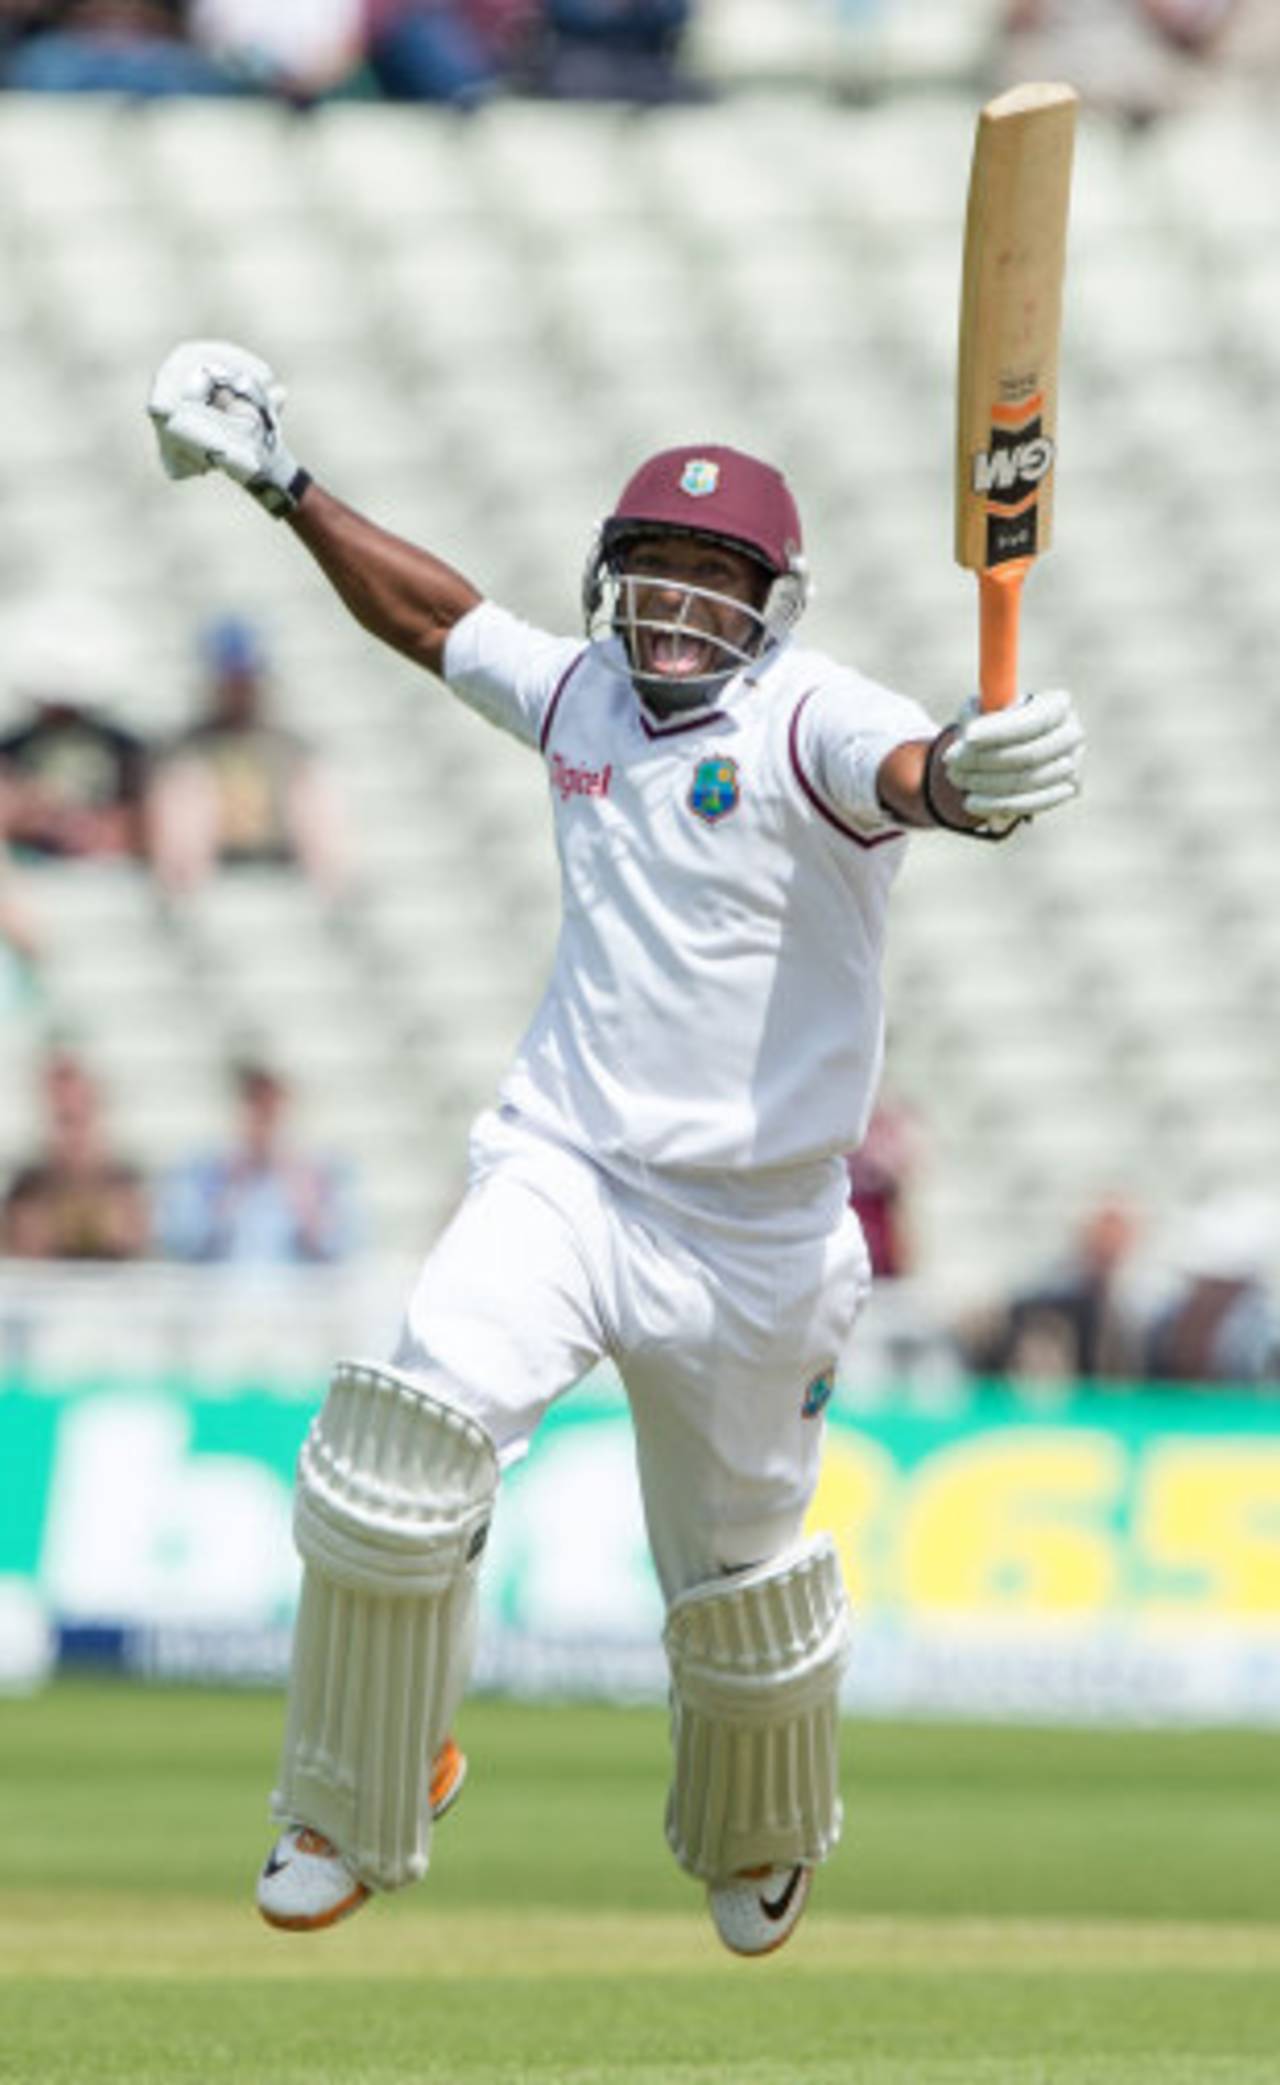 Tino Best is ecstatic after recording his maiden Test half-century, England v West Indies, 3rd Test, Edgbaston, 4th day, June 10, 2012